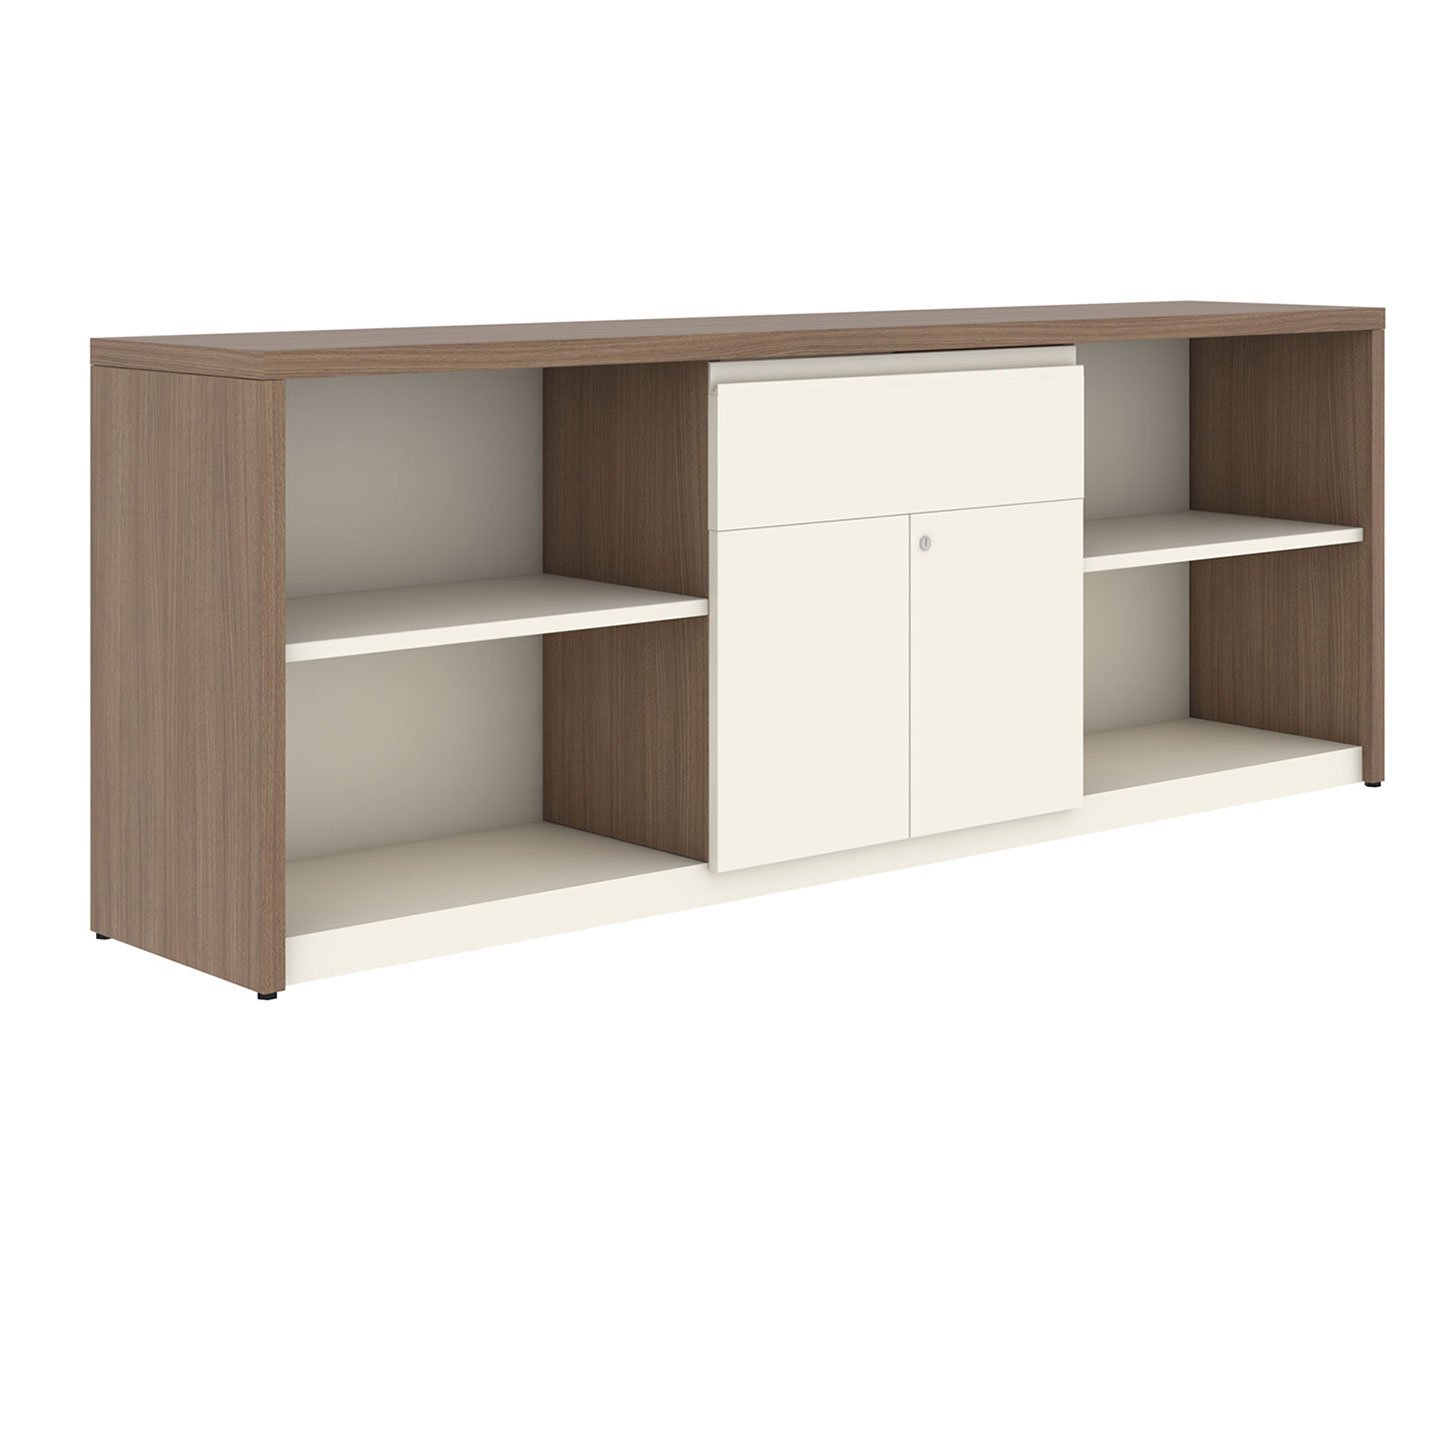 A Series credenza with open shelves and white cabinet doors